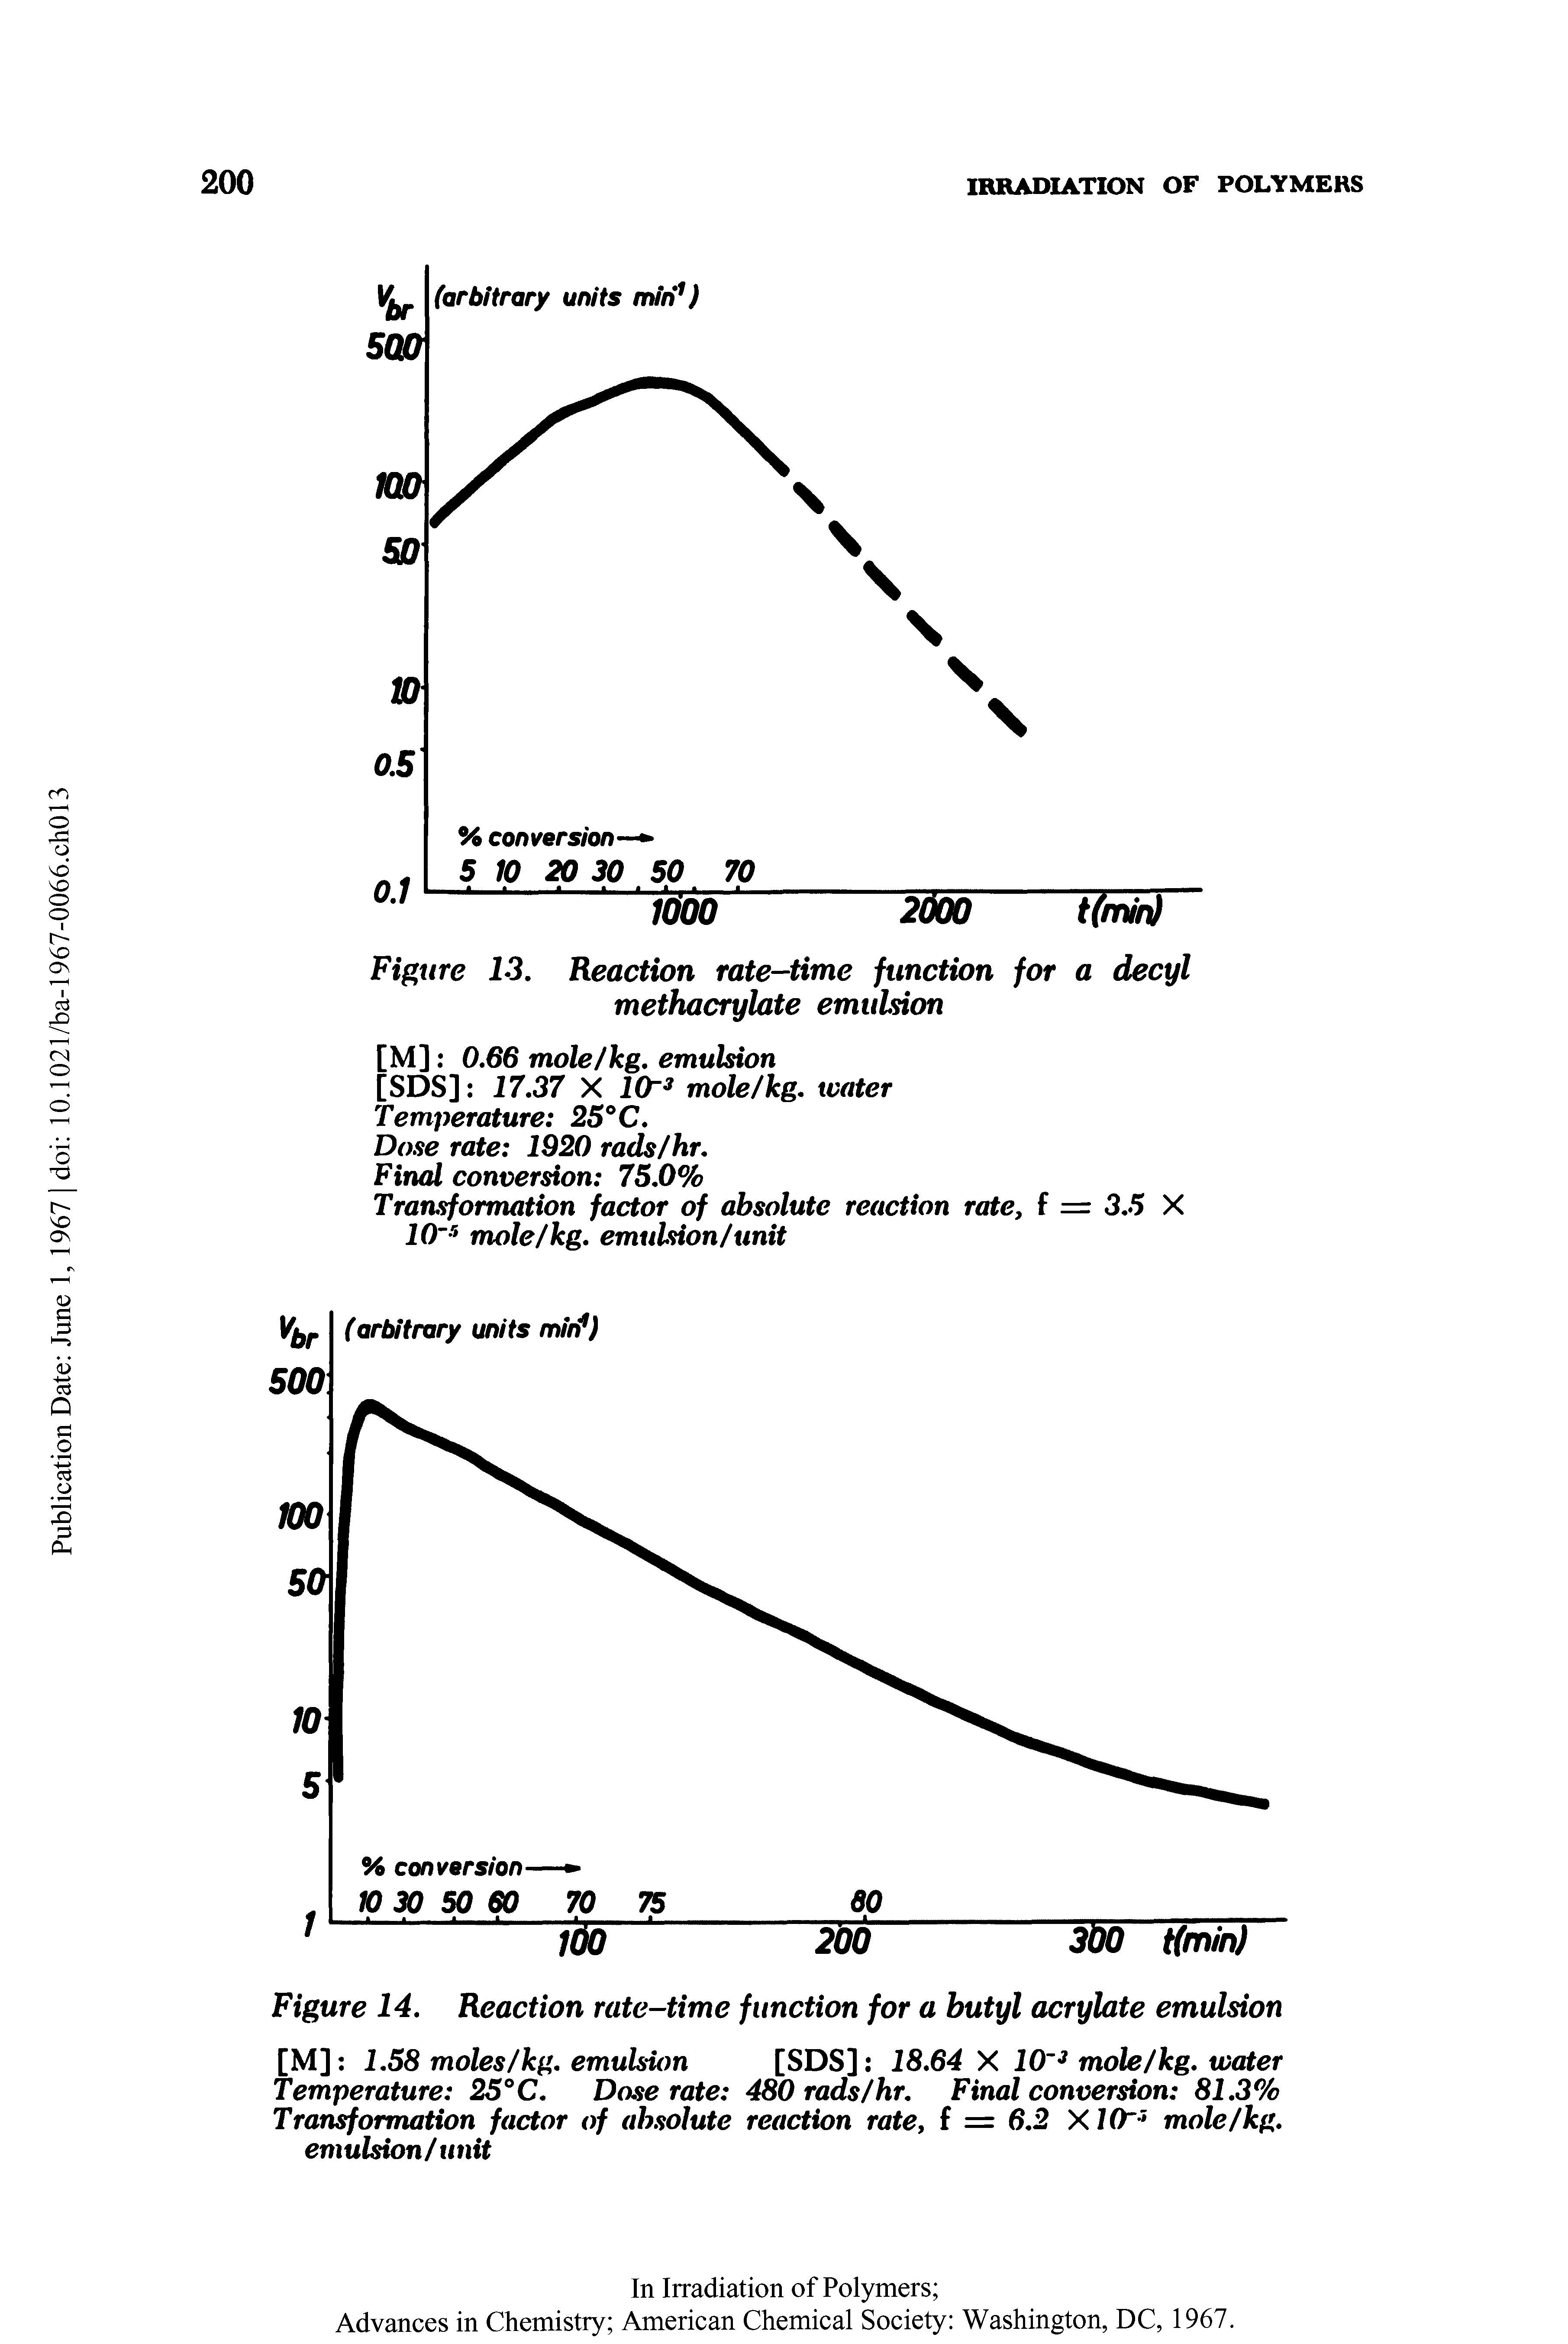 Figure 14. Reaction rate-time function for a butyl acrylate emulsion...